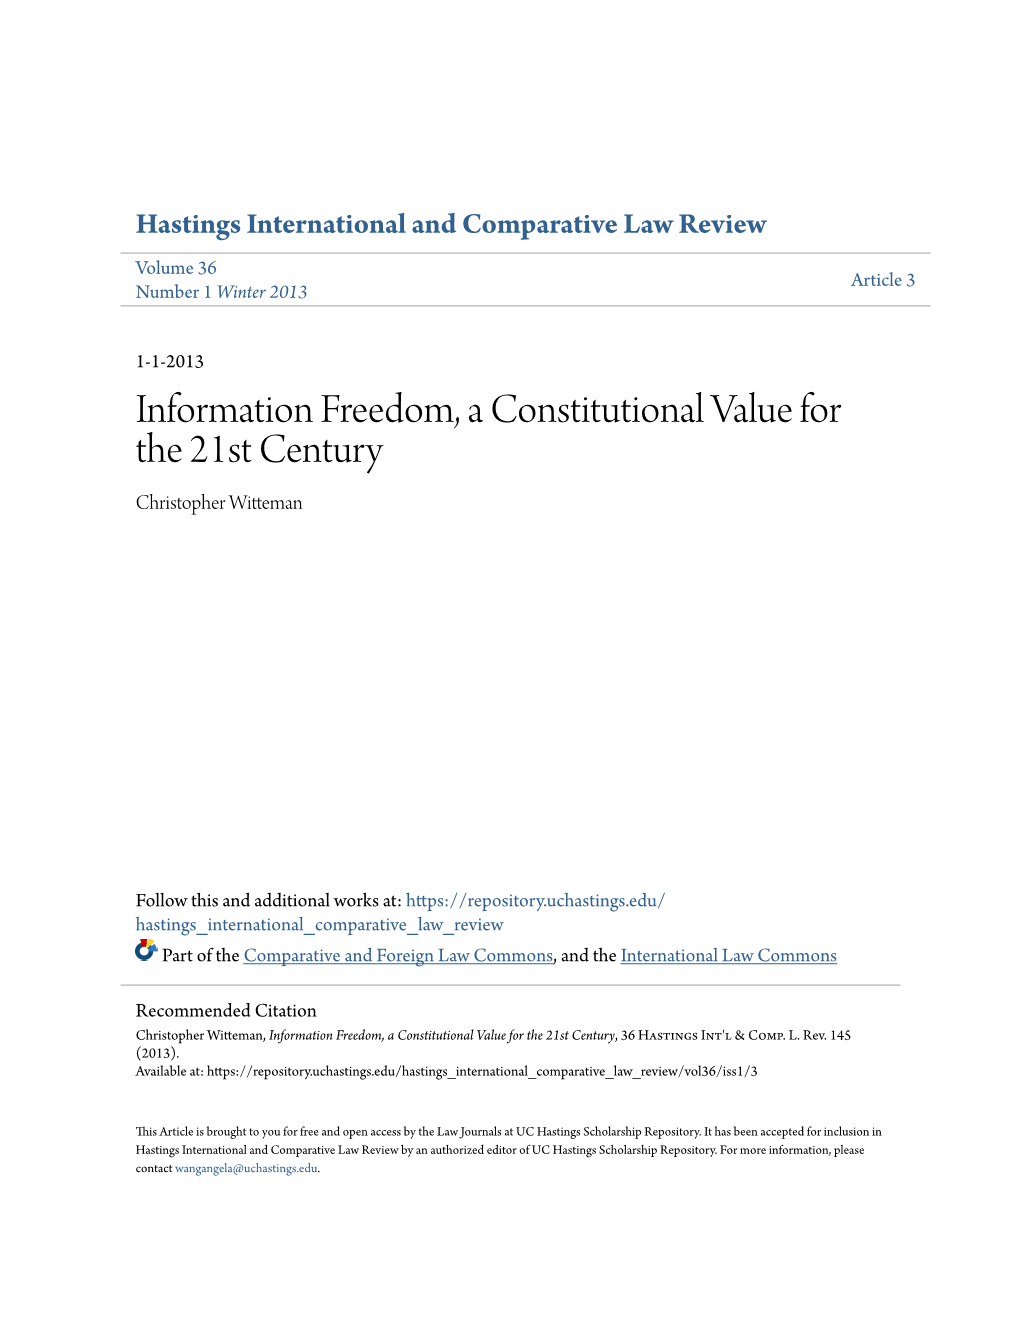 Information Freedom, a Constitutional Value for the 21St Century Christopher Witteman